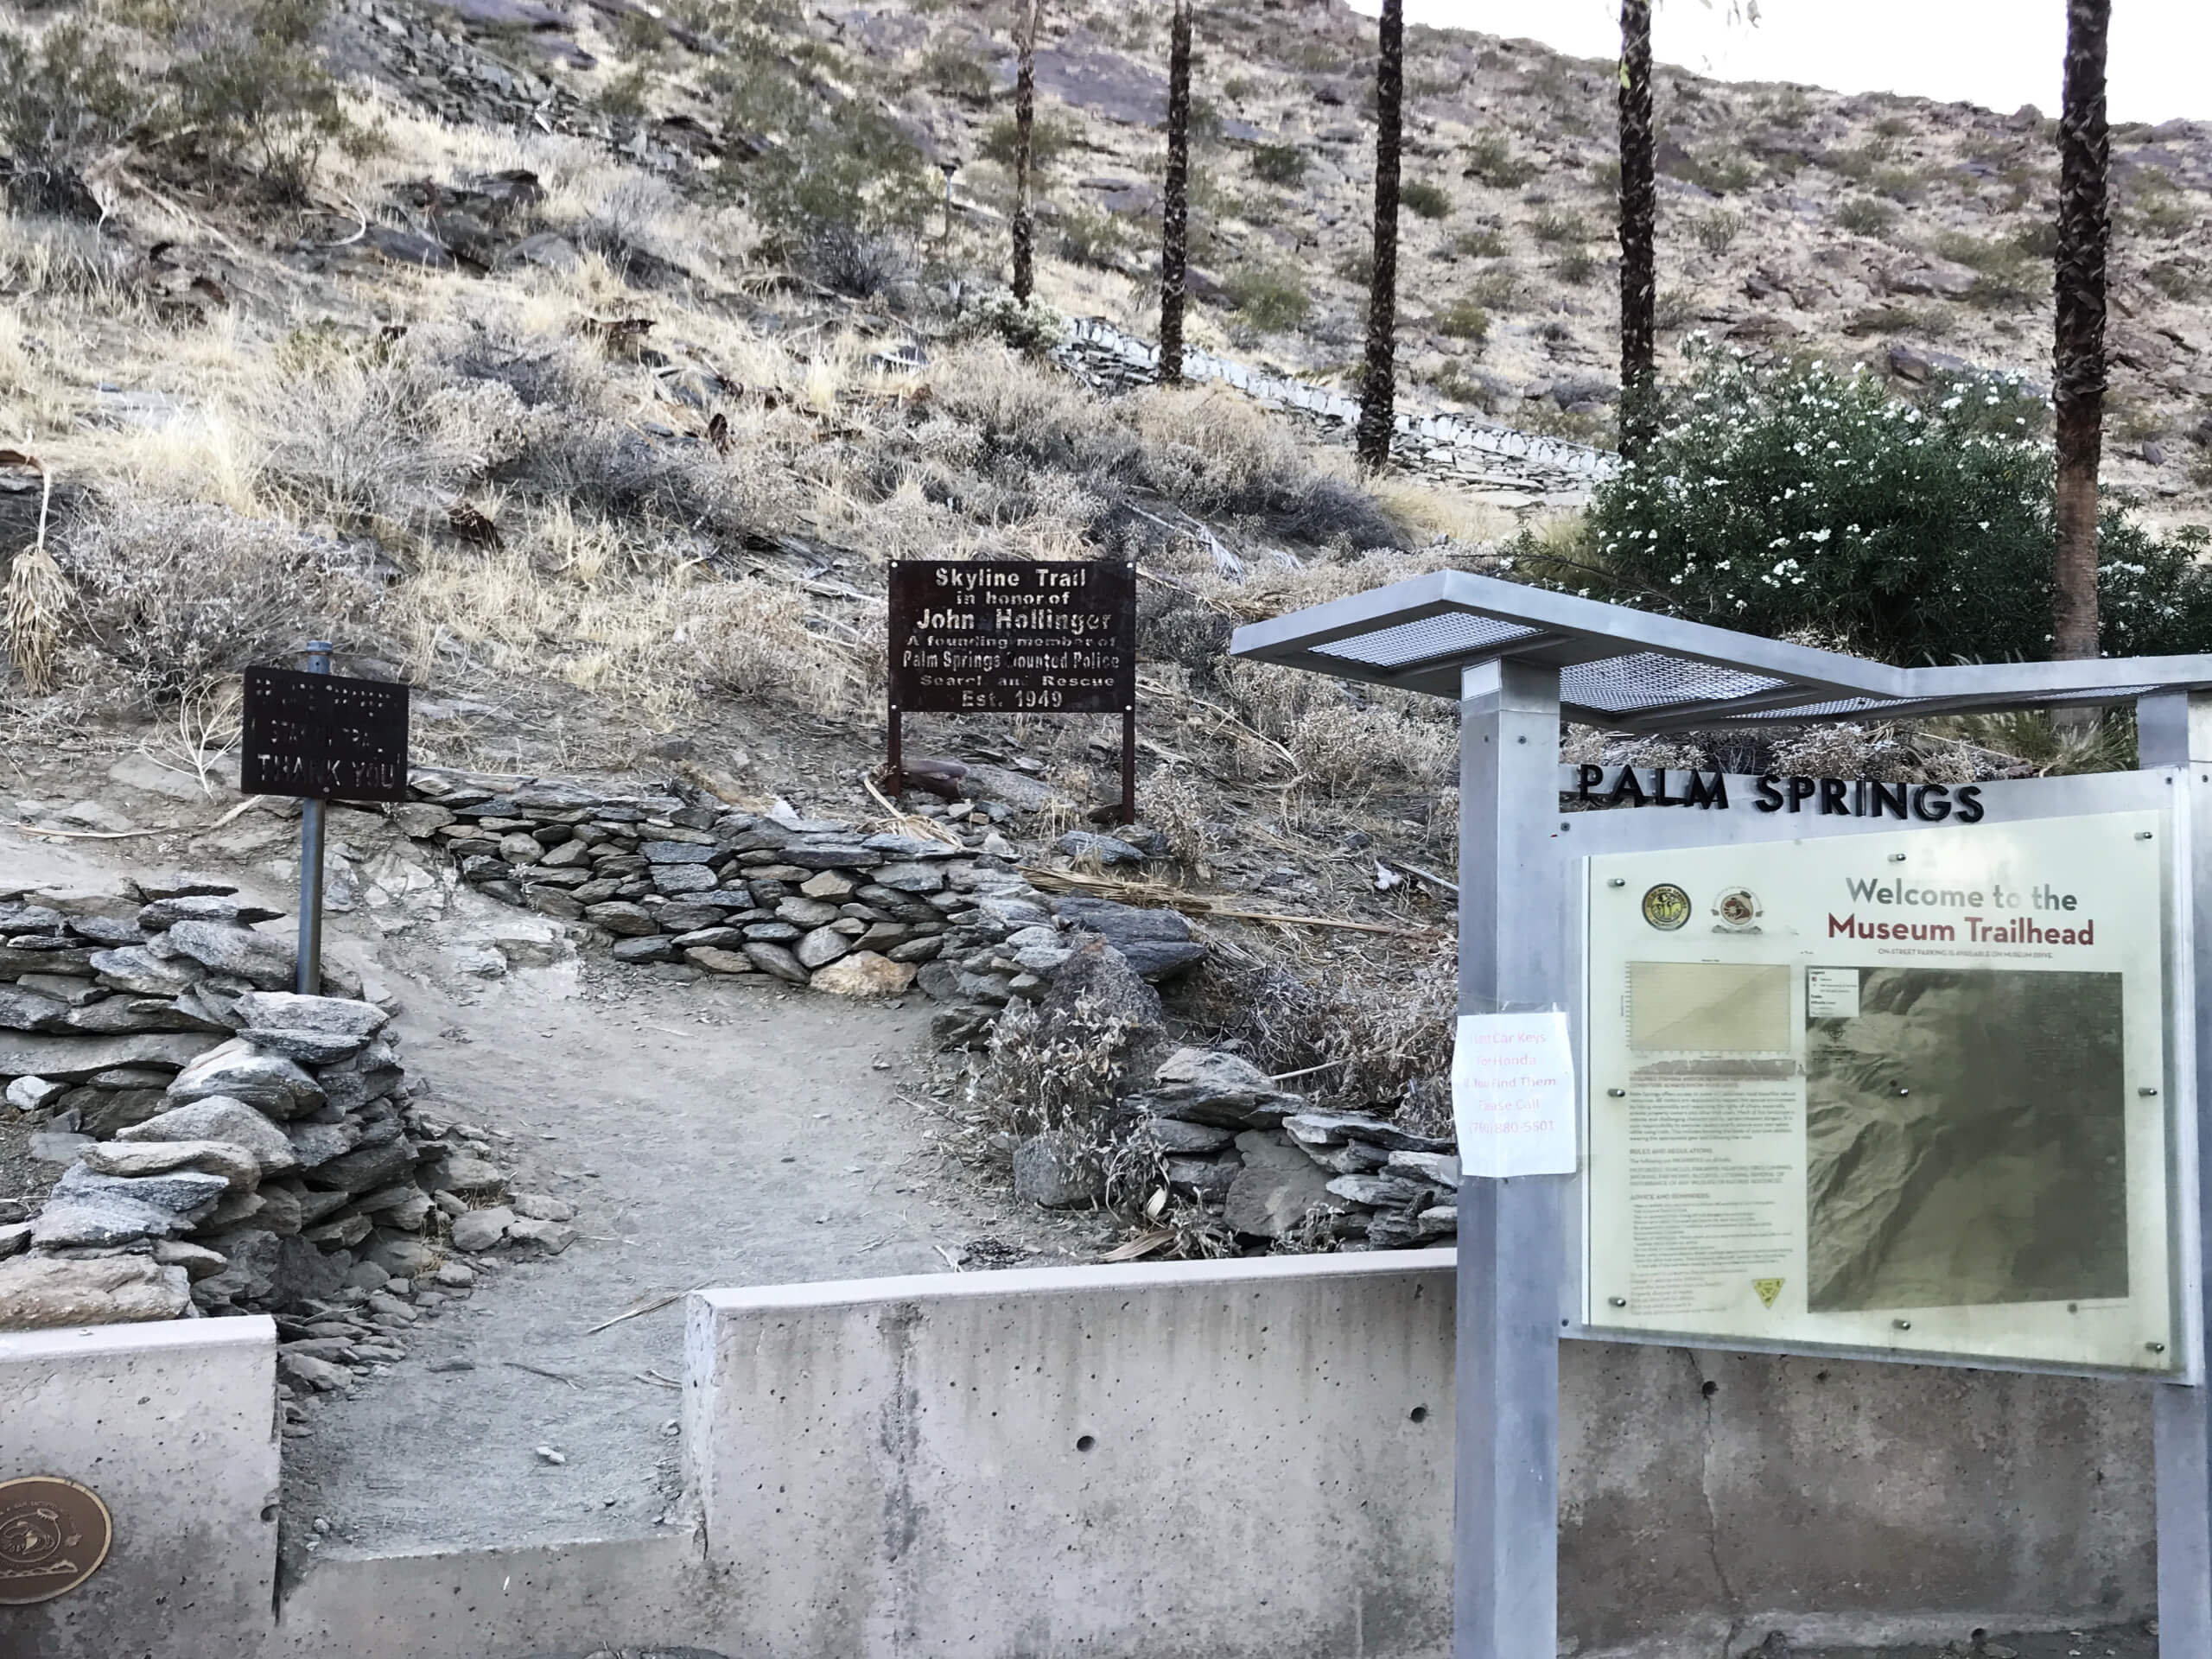 North Lykken Trail to Palm Springs Art Museum